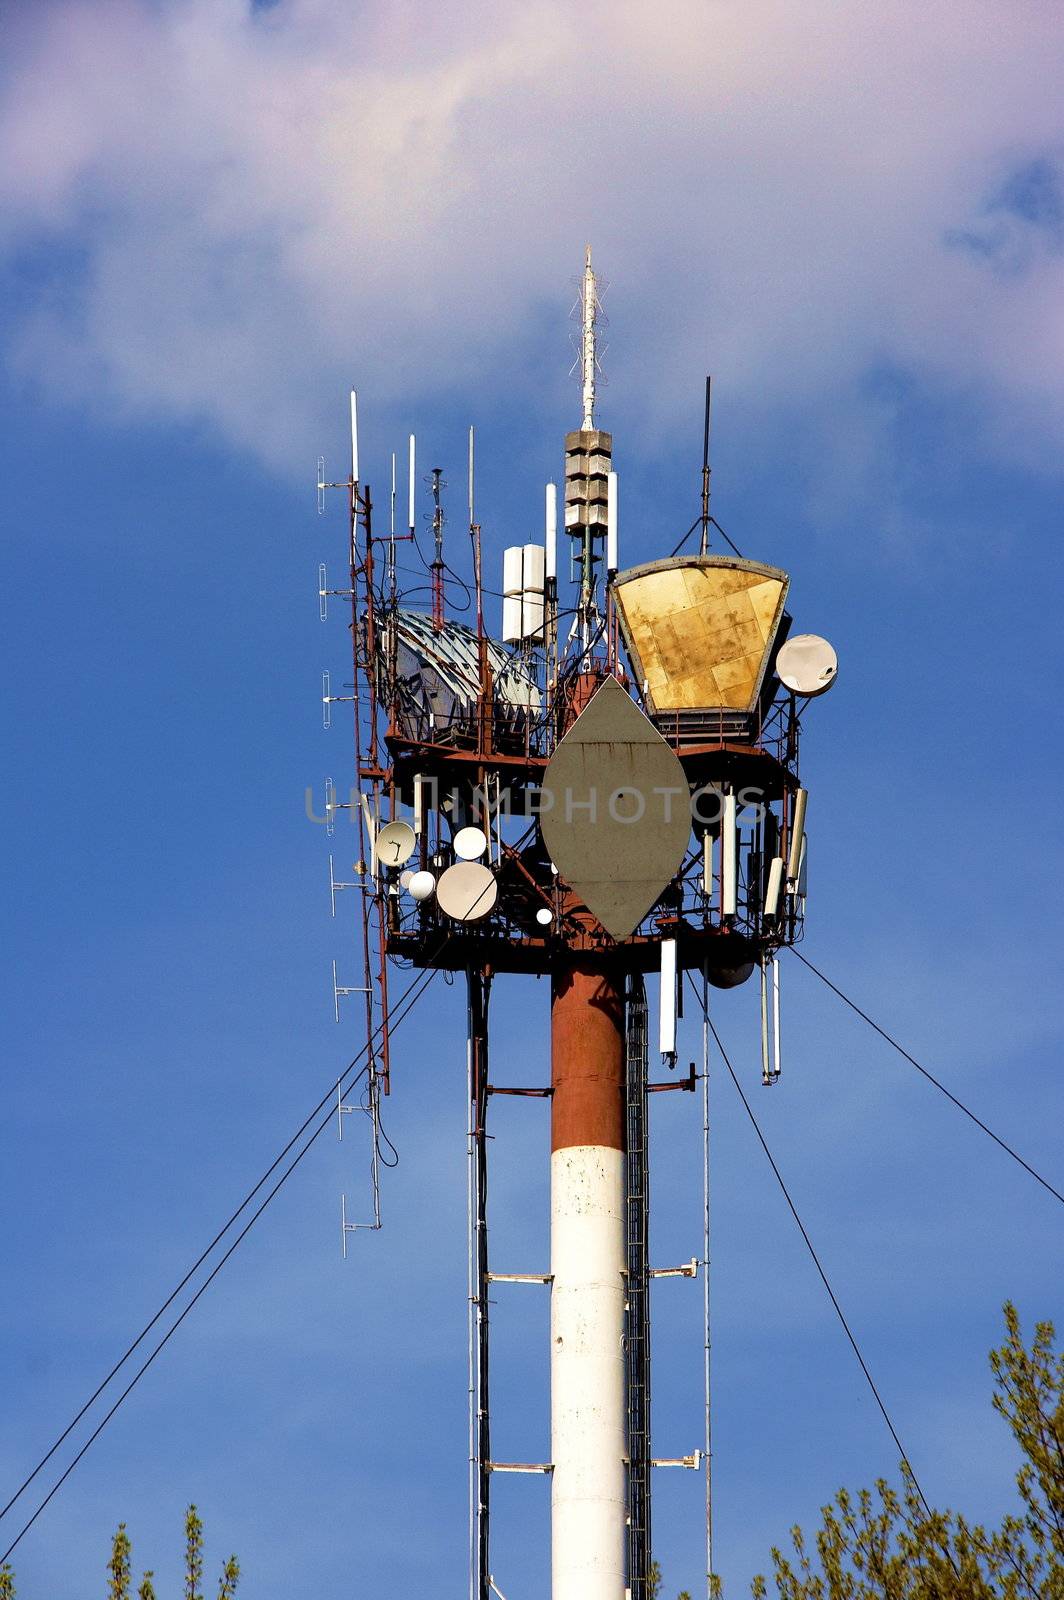 Peak of communication Hi-Tek mast with lights and antennas by fotosergio